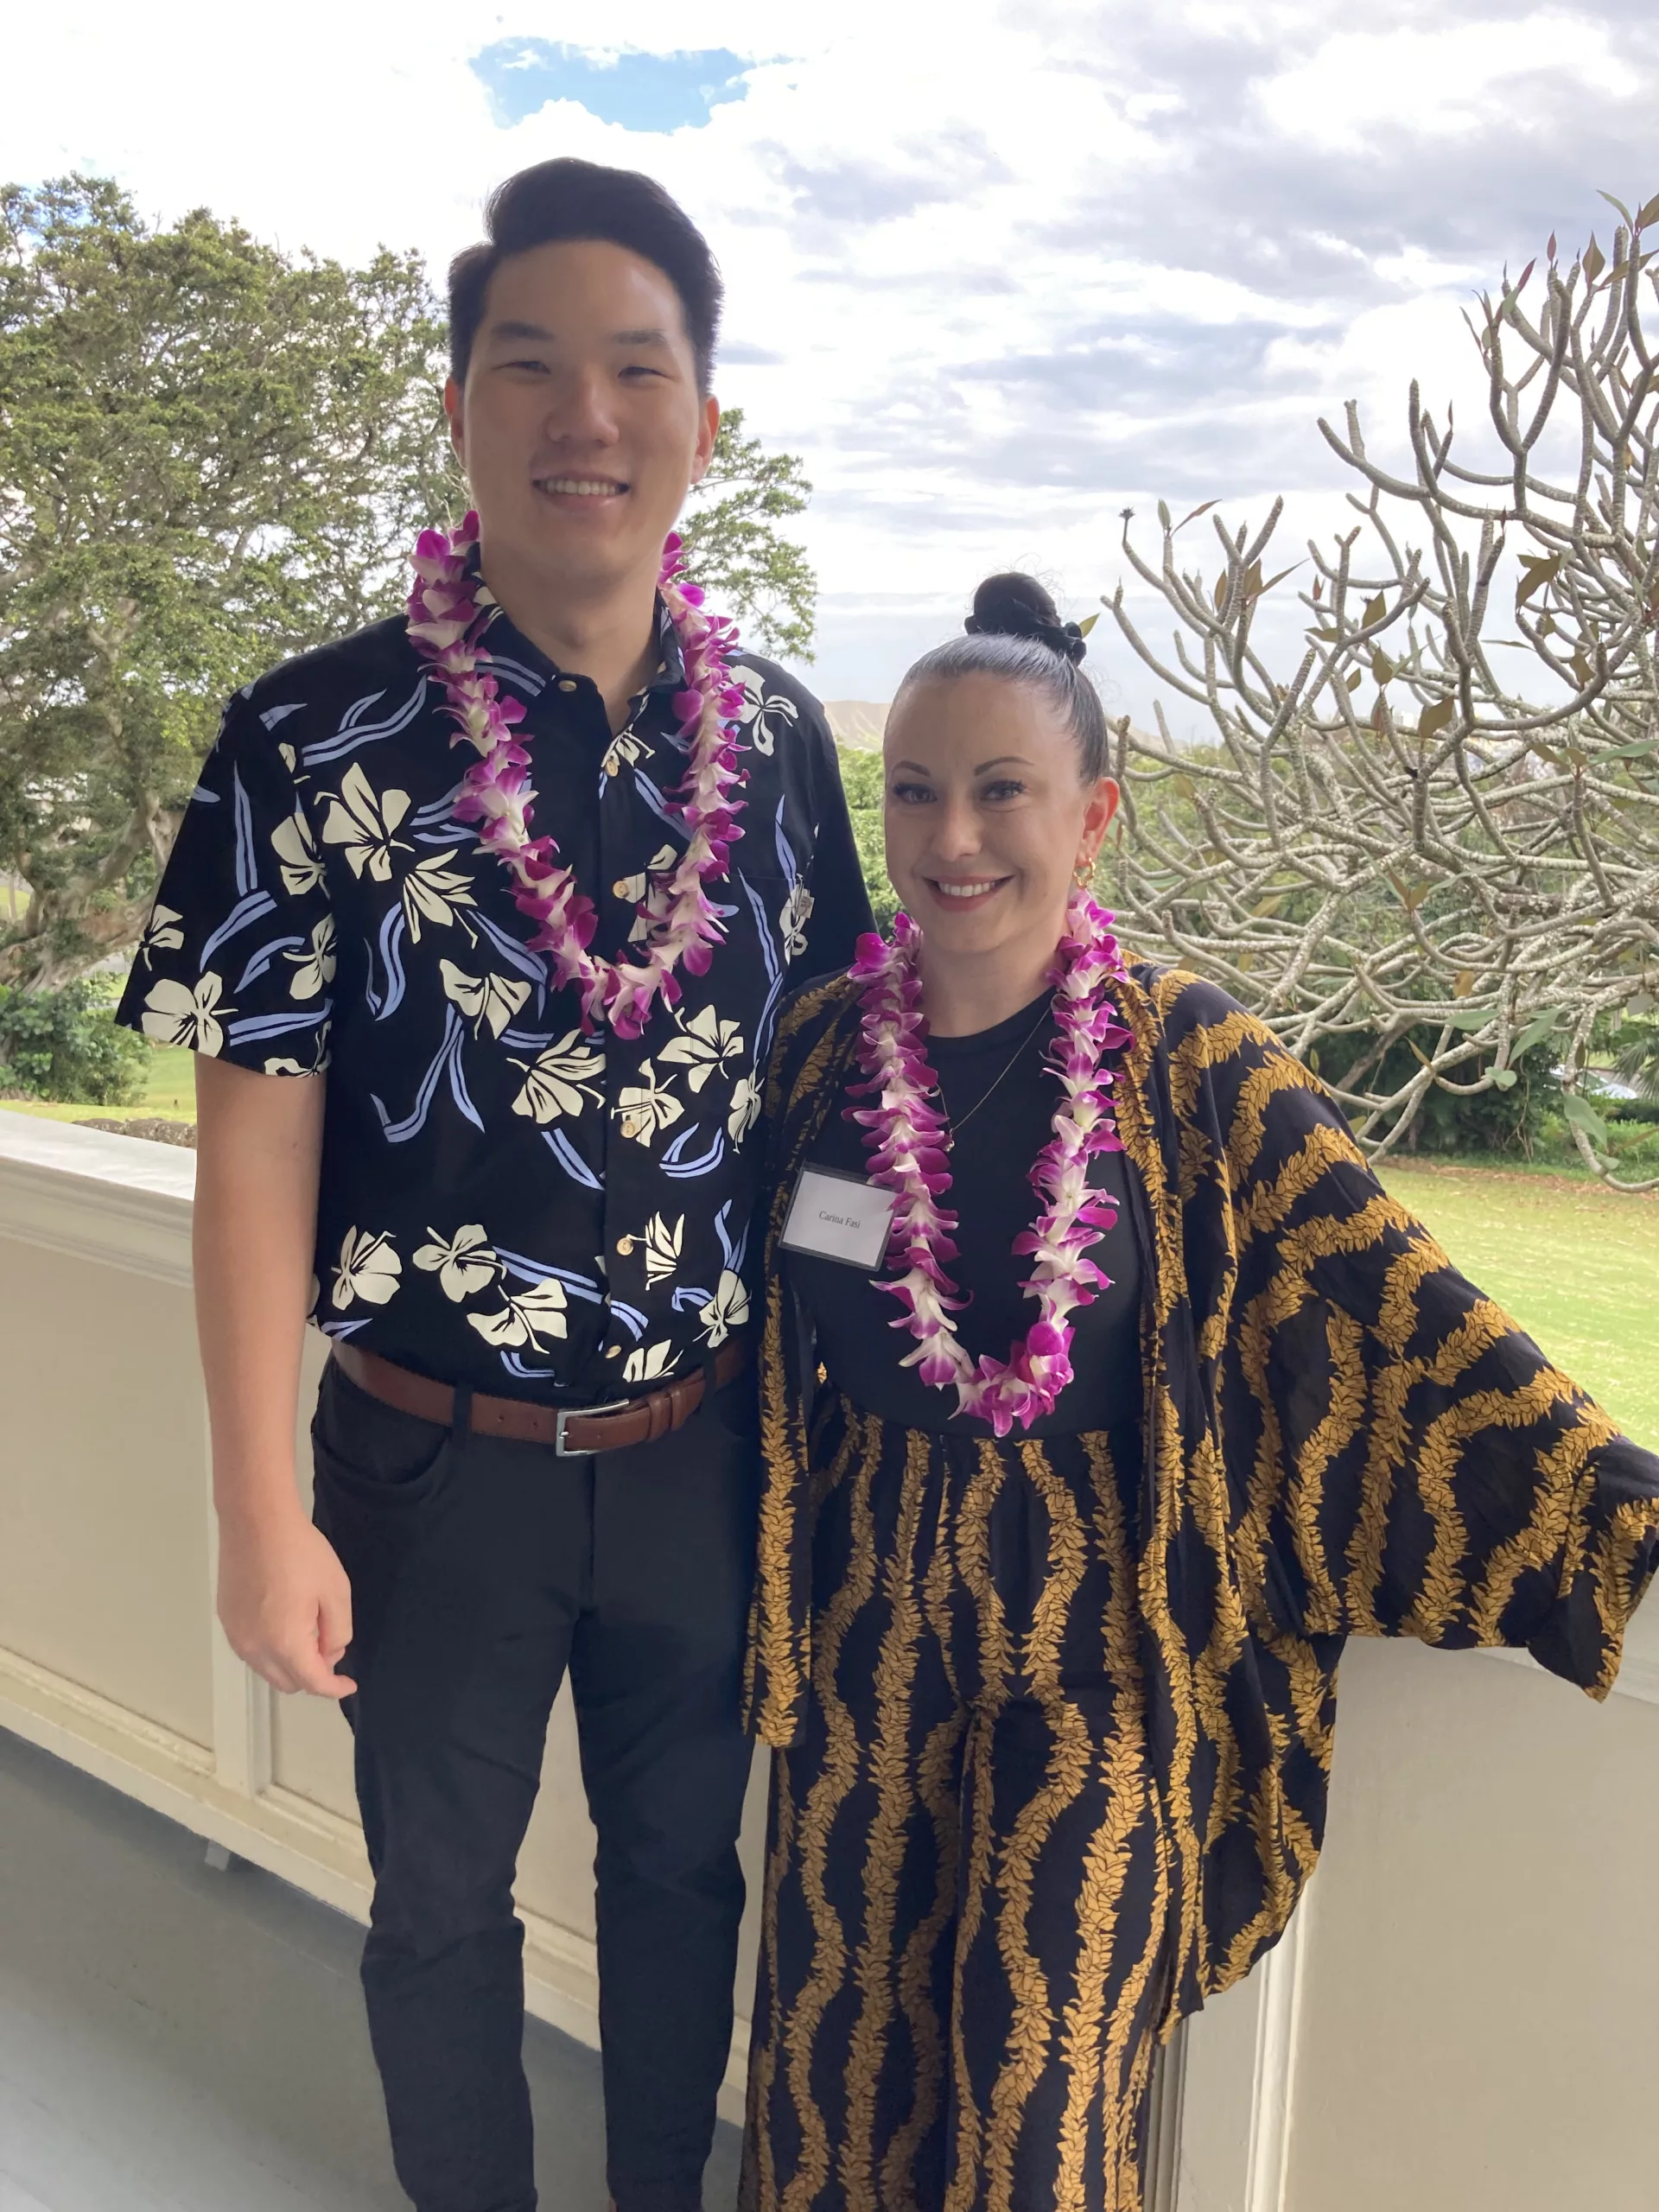 Lei-bedecked man and woman on College Hill lanai